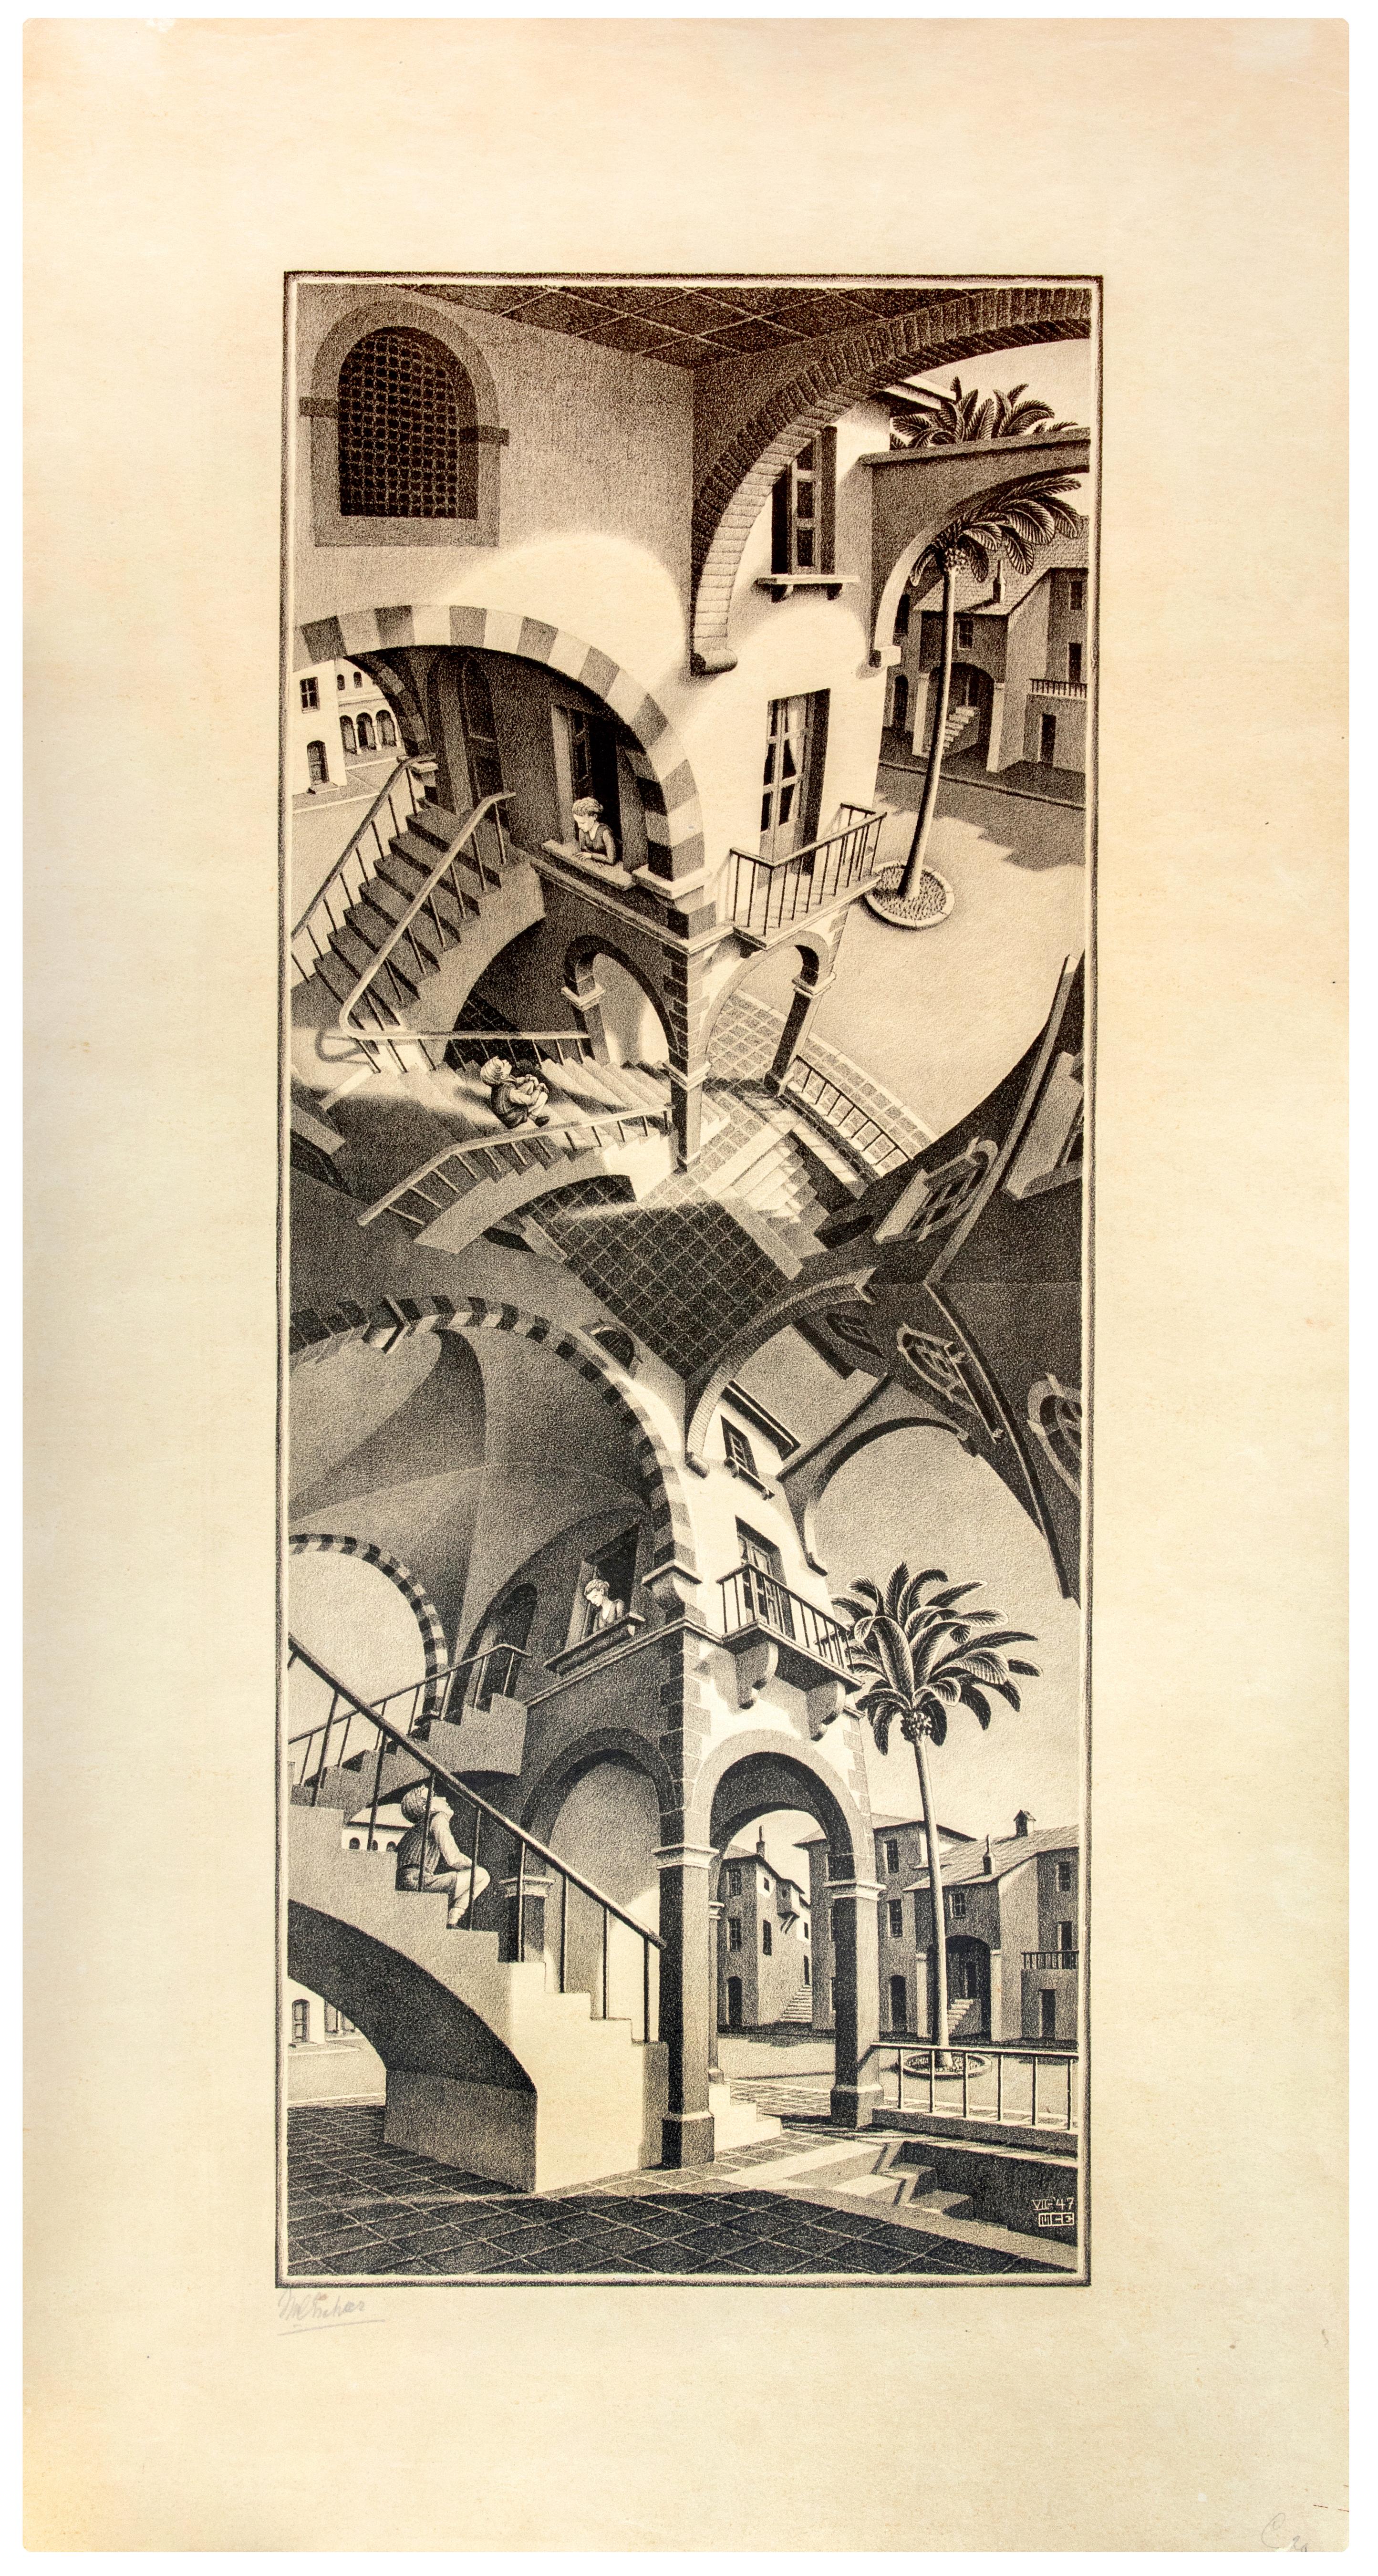 What was Escher famous for?